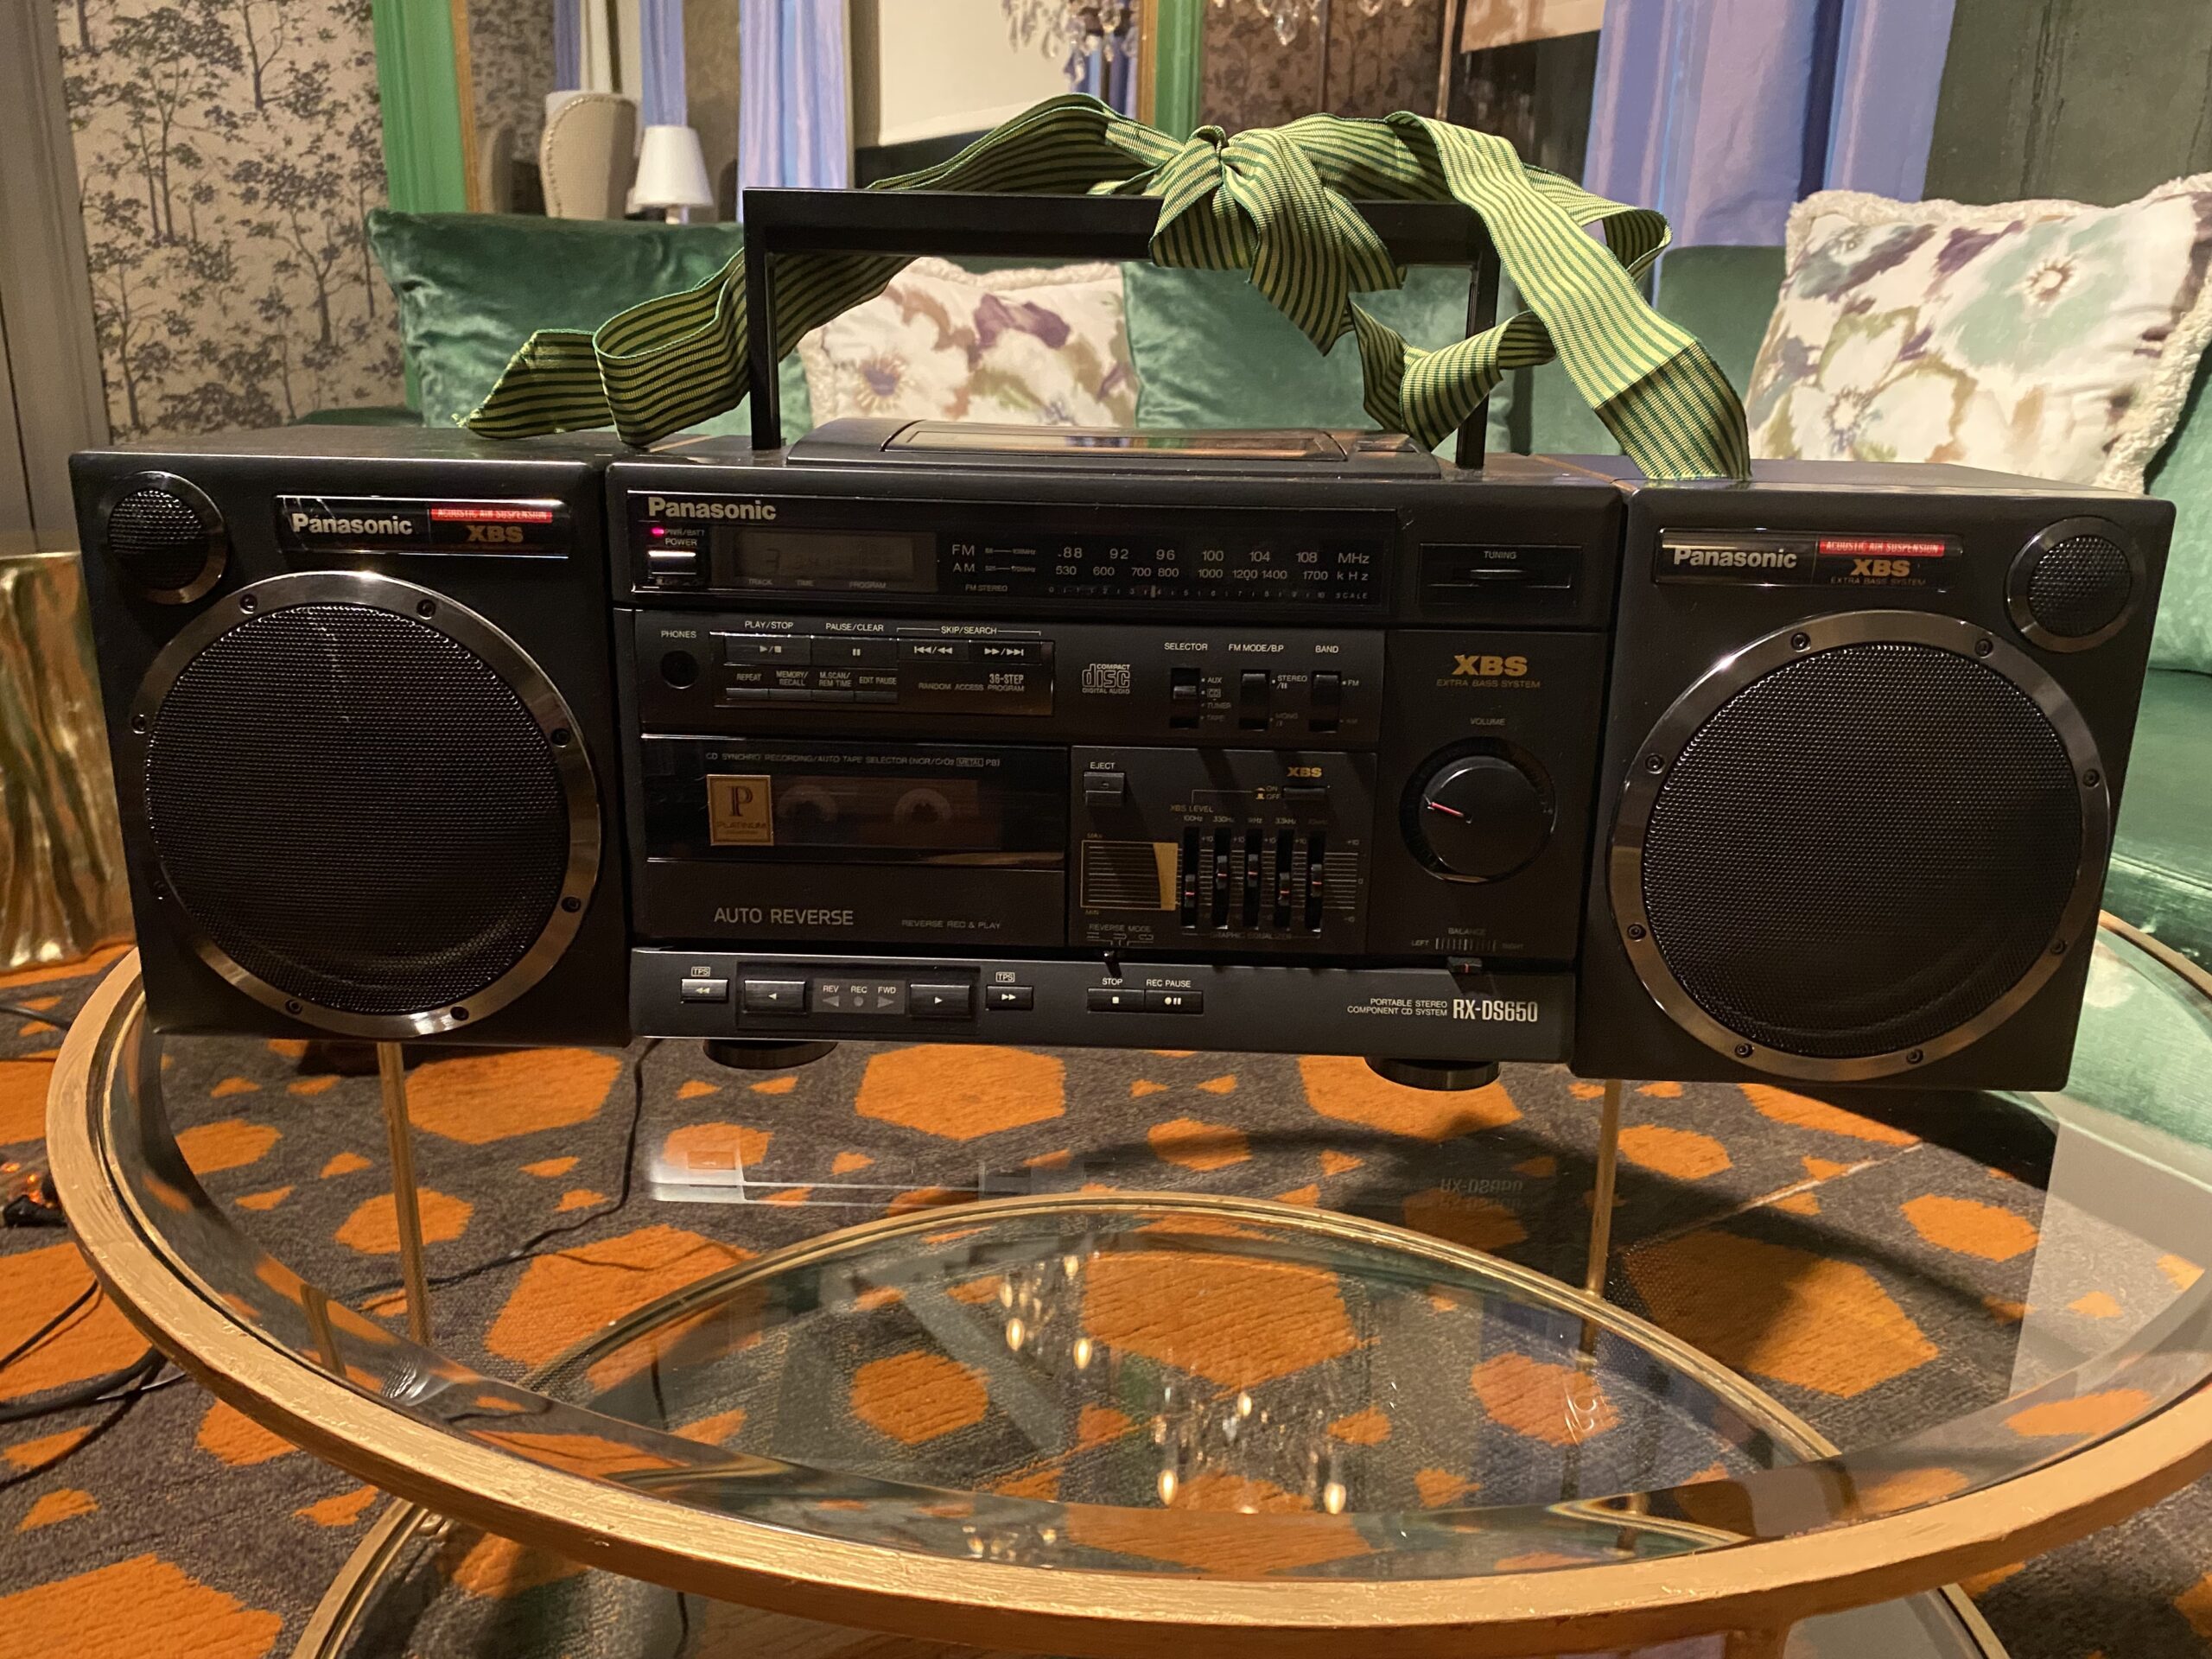 A Panasonic Rx-ds650 boombox sitting on a glass coffee table, with a green bow on top.